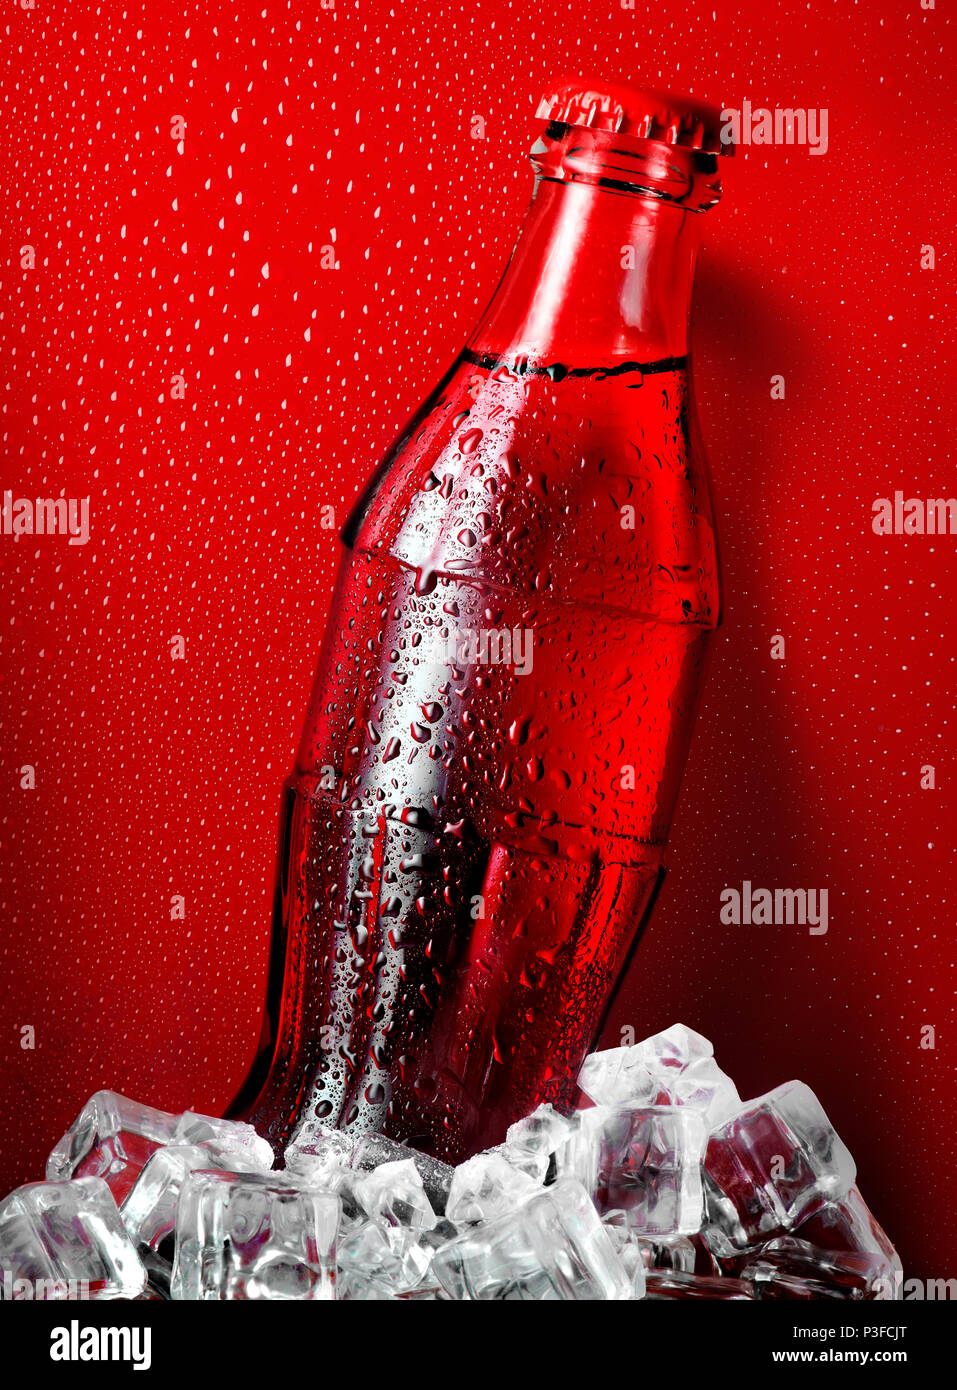 Cola in ice on a red background Stock Photo